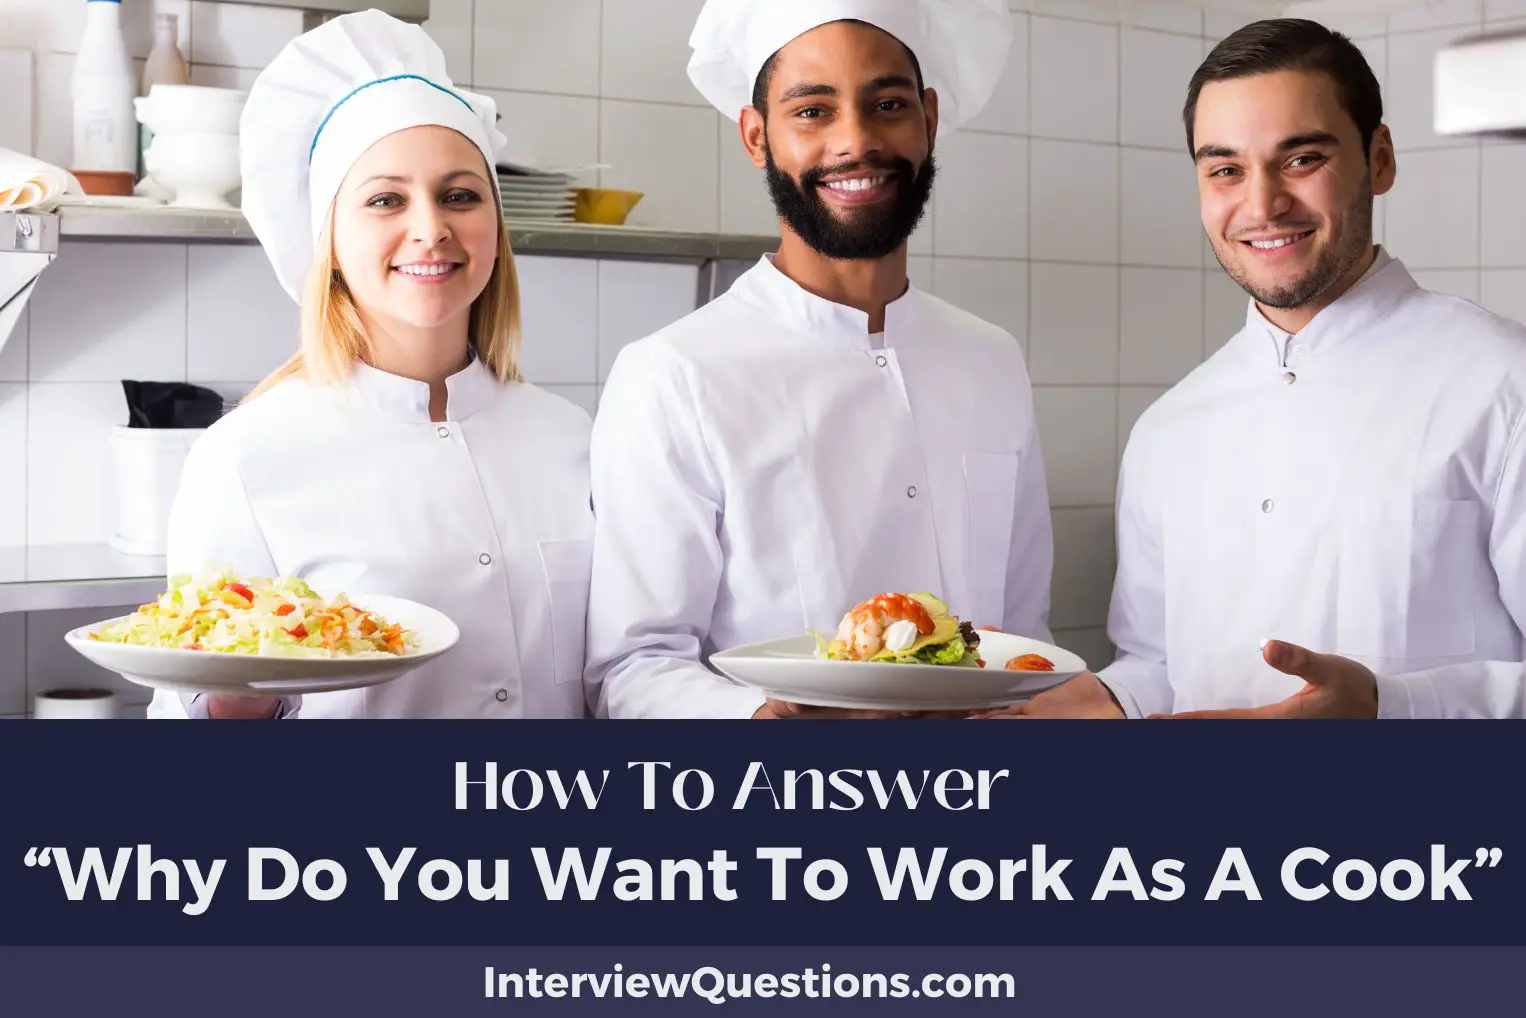 Why Do You Want To Work As A Cook